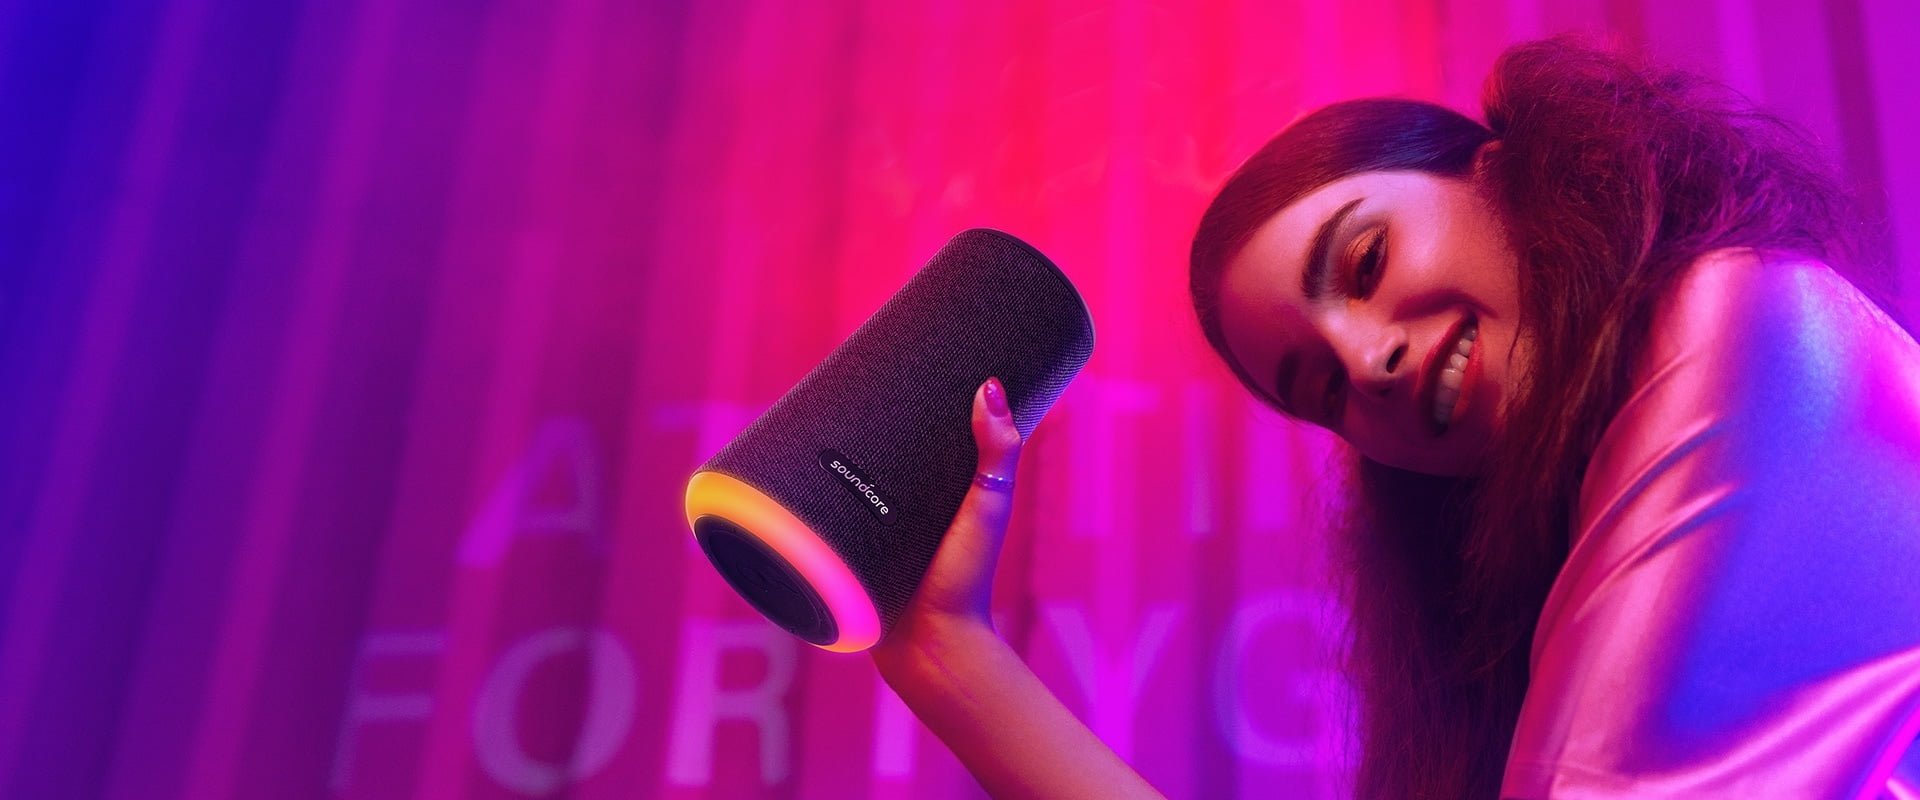 Anker Soundcore Flare Plus Review – A £110 Waterproof Portable 360° Bluetooth Speaker